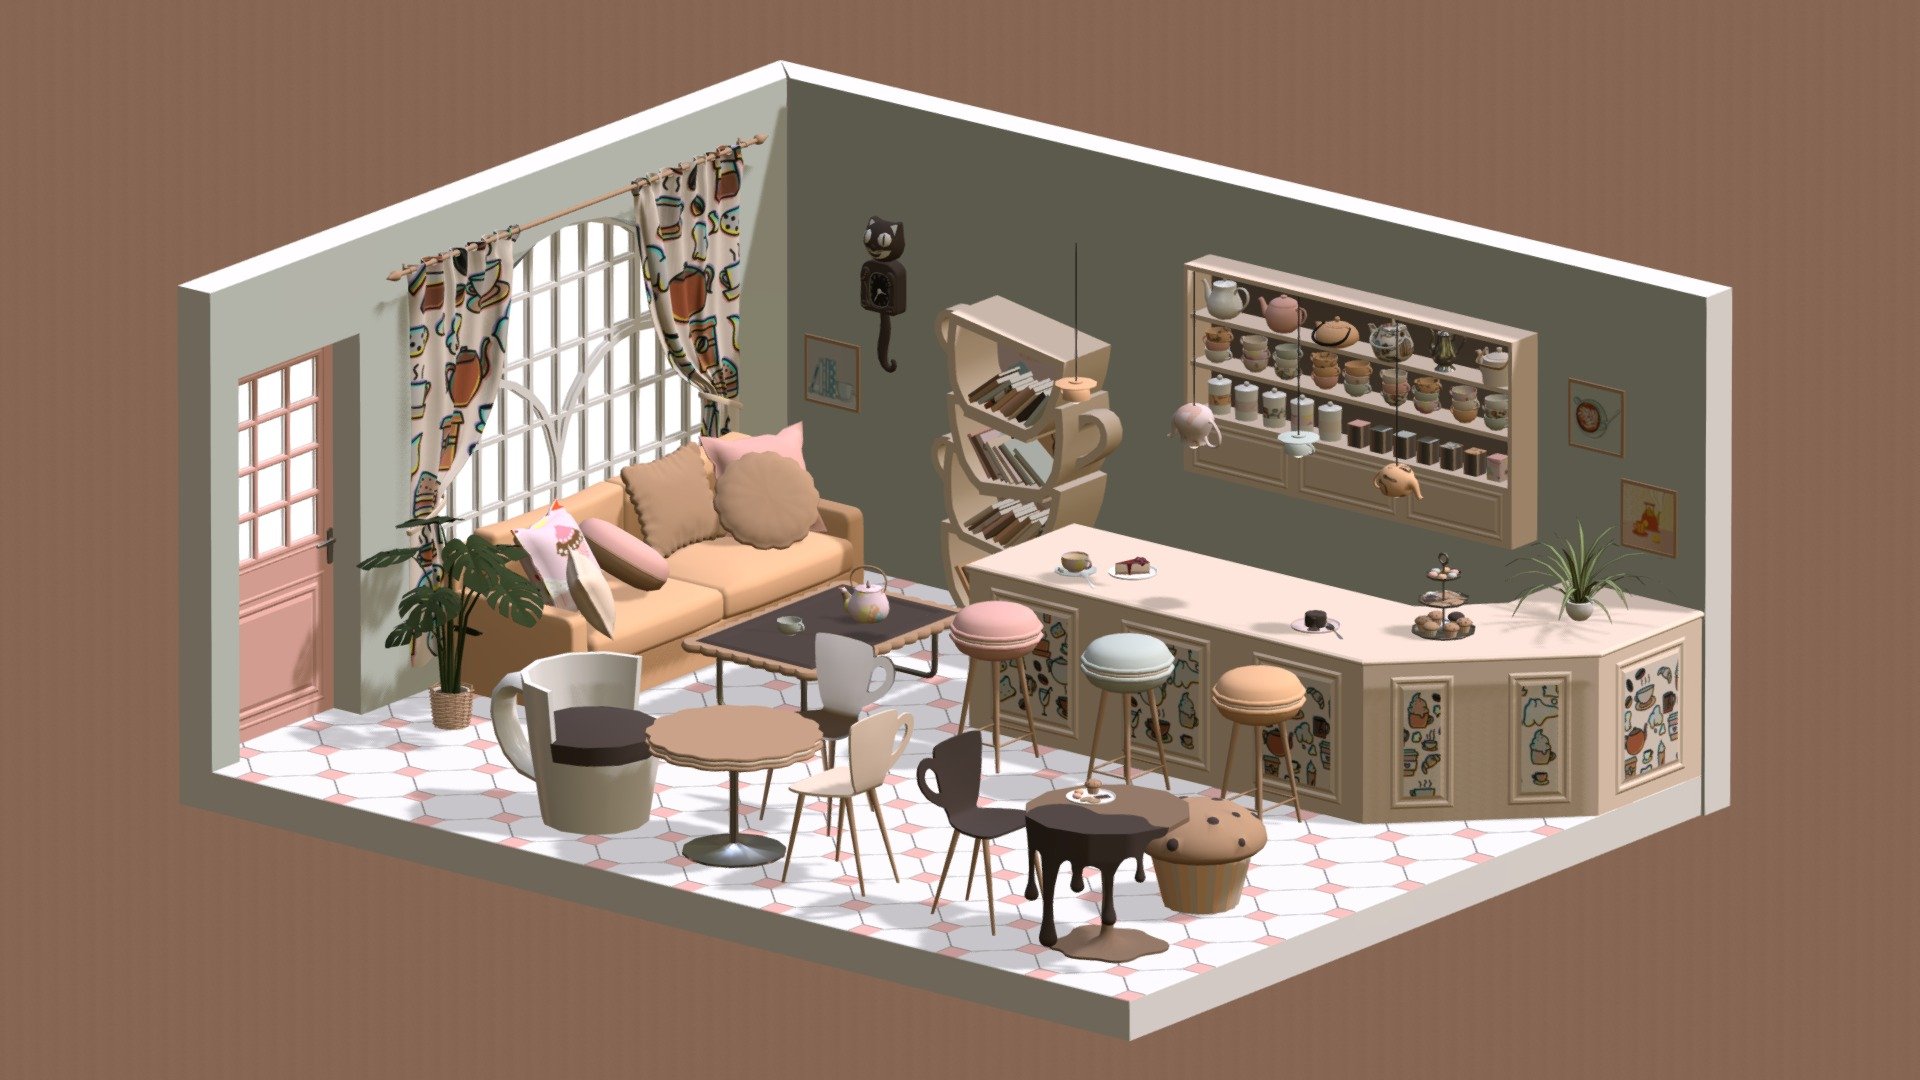 Hello everyone !

I am pleased to present this teahouse that will blend into any decor of this style ! You can integrate these 3d model into all your games or animations and create a unique decor of which only you have the secret ! This pack contains:

Bar
Wall shelf
Shelf cup
Chair cup
Armchair cup
Table chocolate
Table biscuit
Coffee table biscuit
Sofa
Cushions
Macaron stool
Cake stand
Muffin
Biscuit
Macaron
Plants
Cup
Teapot
Lamp
Clock
Books
Door
Window
Cheesecake
Tea
Chocolate cake
Actually, everything you see in the images above. Let yourself be carried away by your imagination ! Enjoy !

Made in blender - Teahouse - Buy Royalty Free 3D model by ApprenticeRaccoon 3d model